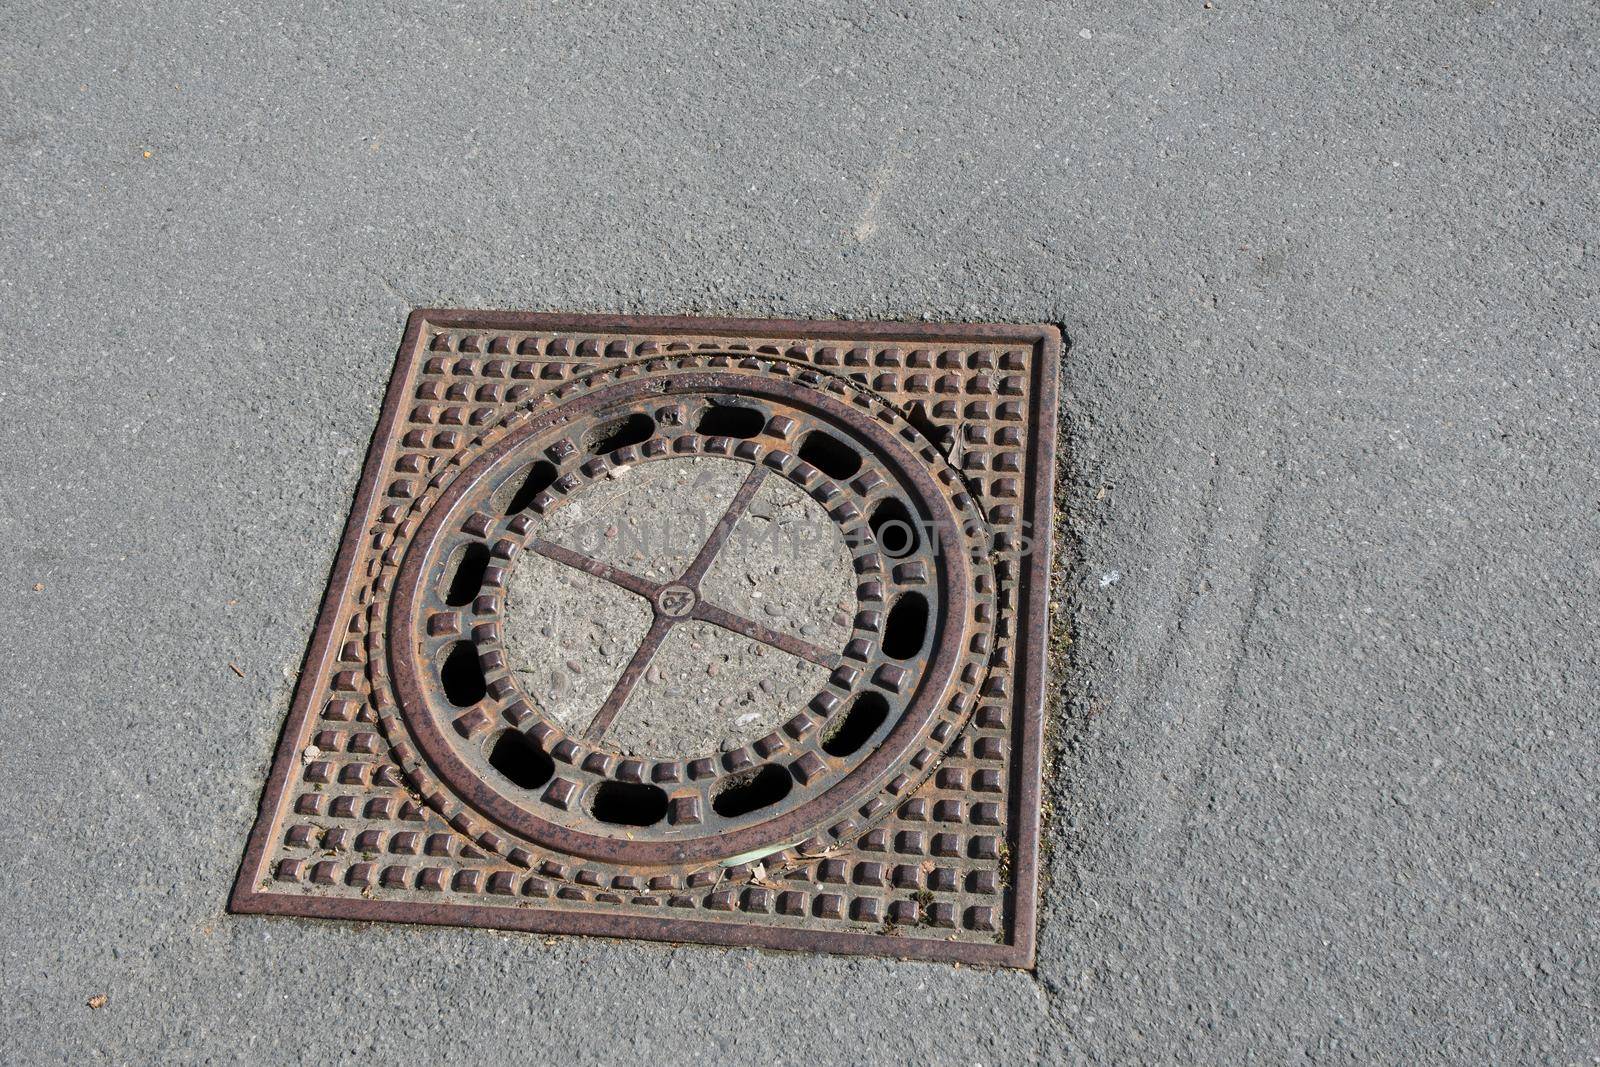 Old iron metal manhole cover sewer cap on the city street asphalt by KaterinaDalemans